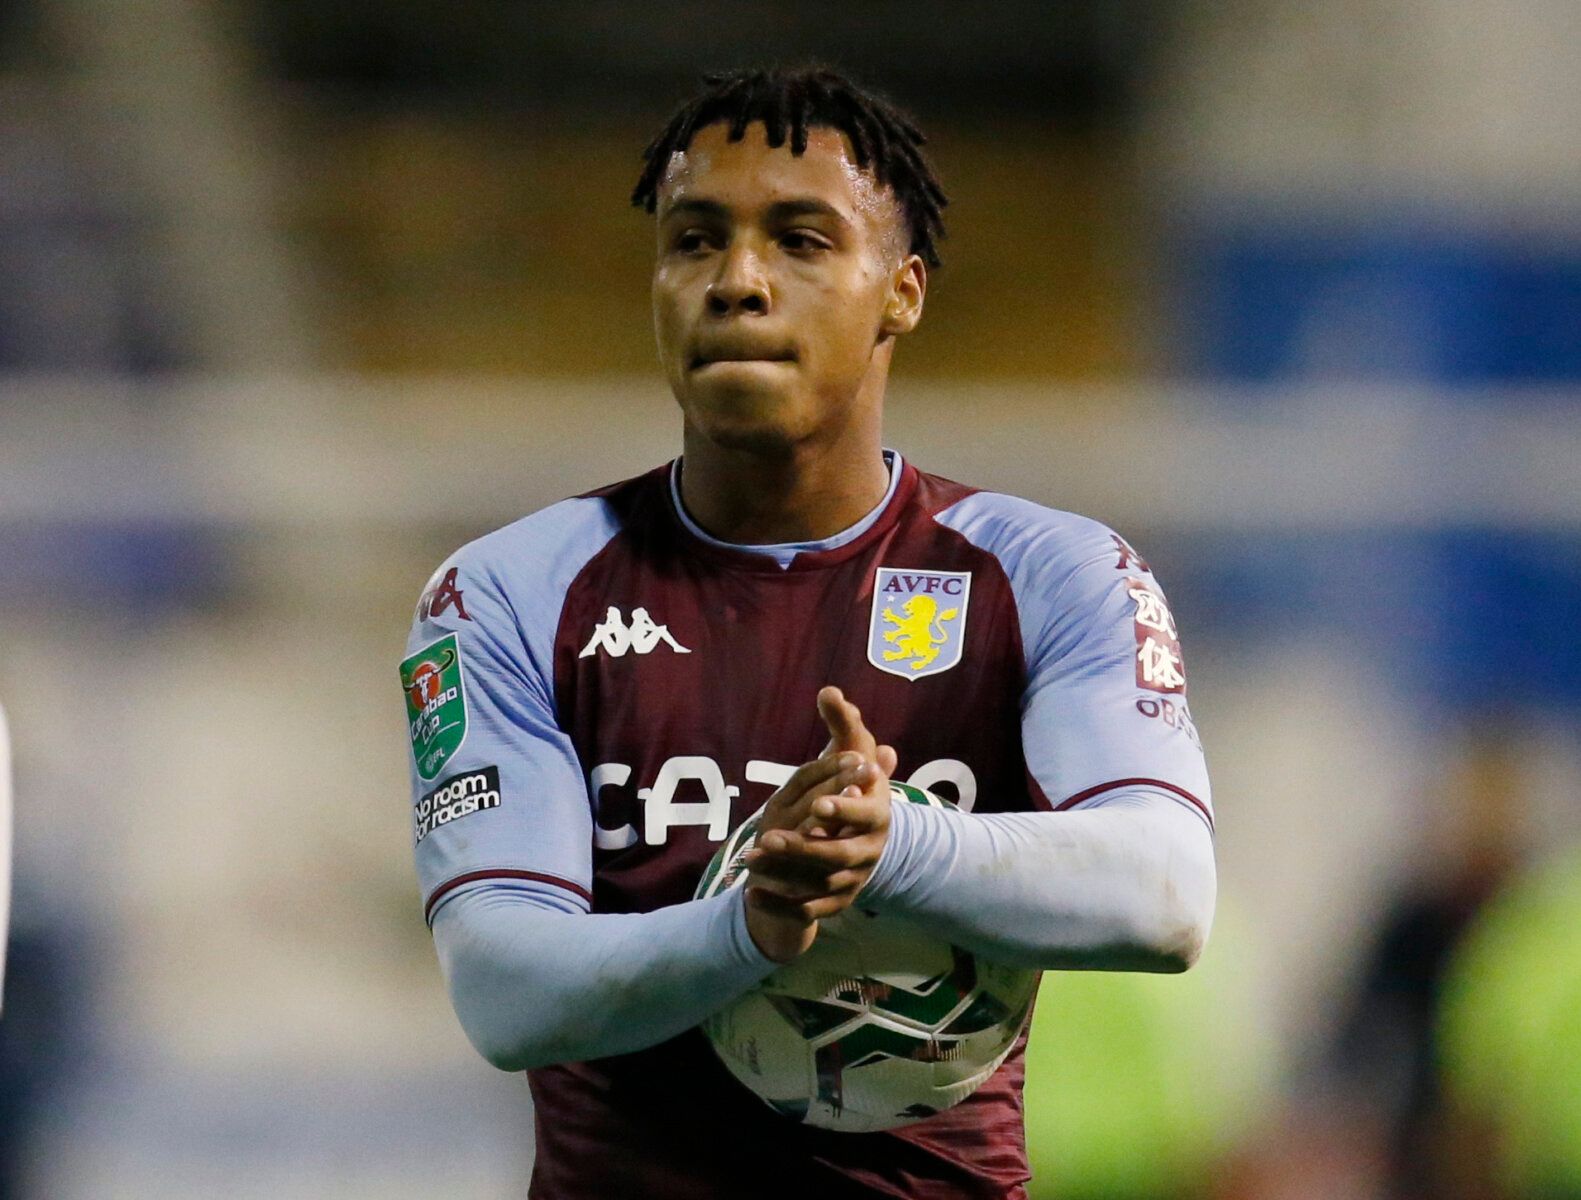 Soccer - England - Carabao Cup Second Round - Barrow v Aston Villa - Holker Street, Barrow-in-Furness, Britain - August 24, 2021 Aston Villa's Cameron Archer celebrates after the match after scoring a hat-trick Action Images via Reuters/Ed Sykes